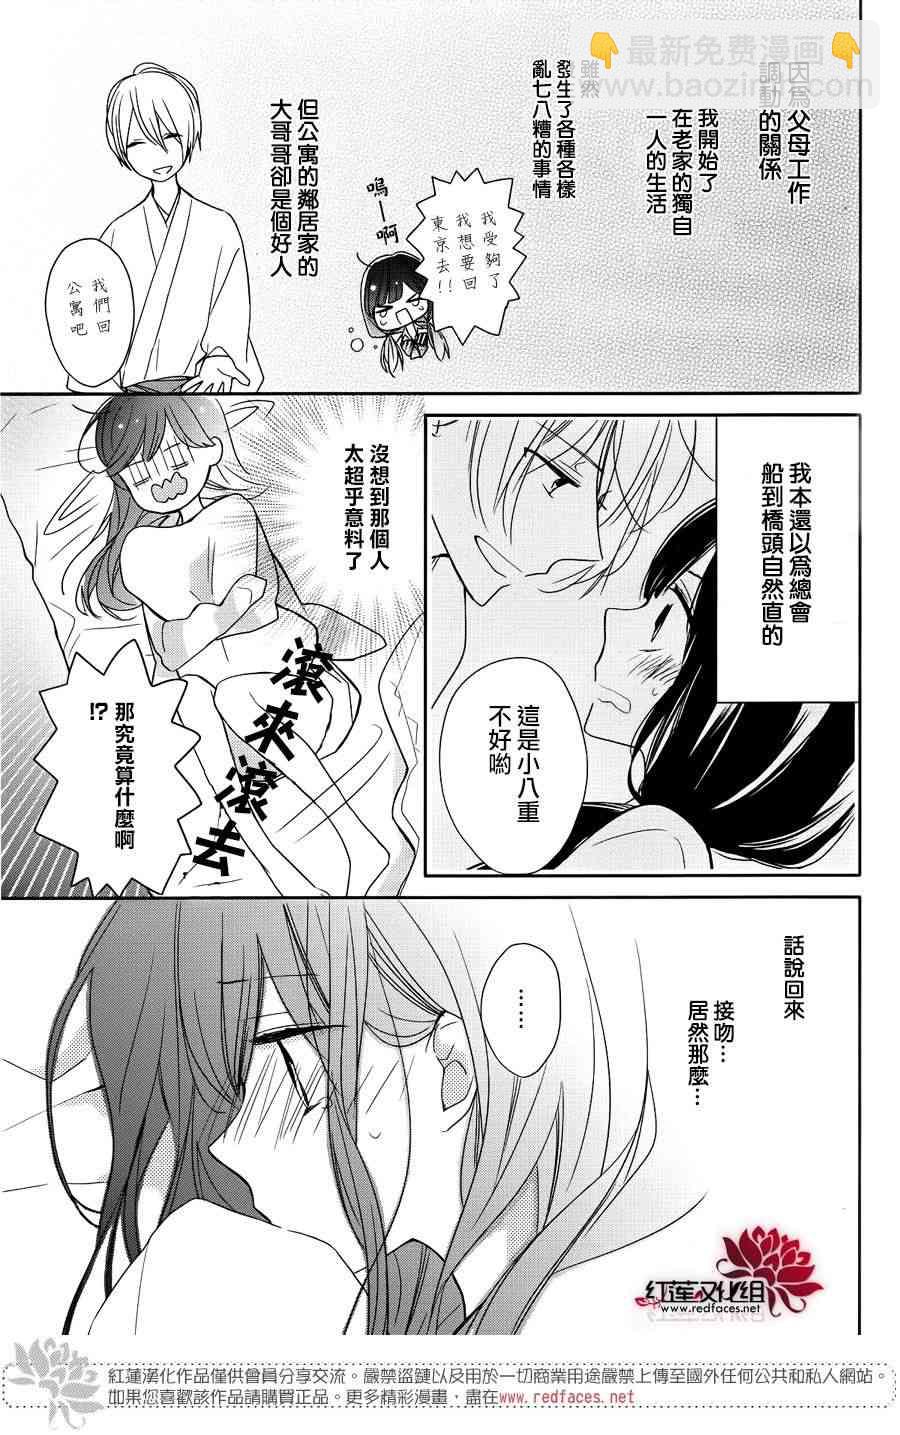 If given a second chance - 2話 - 3